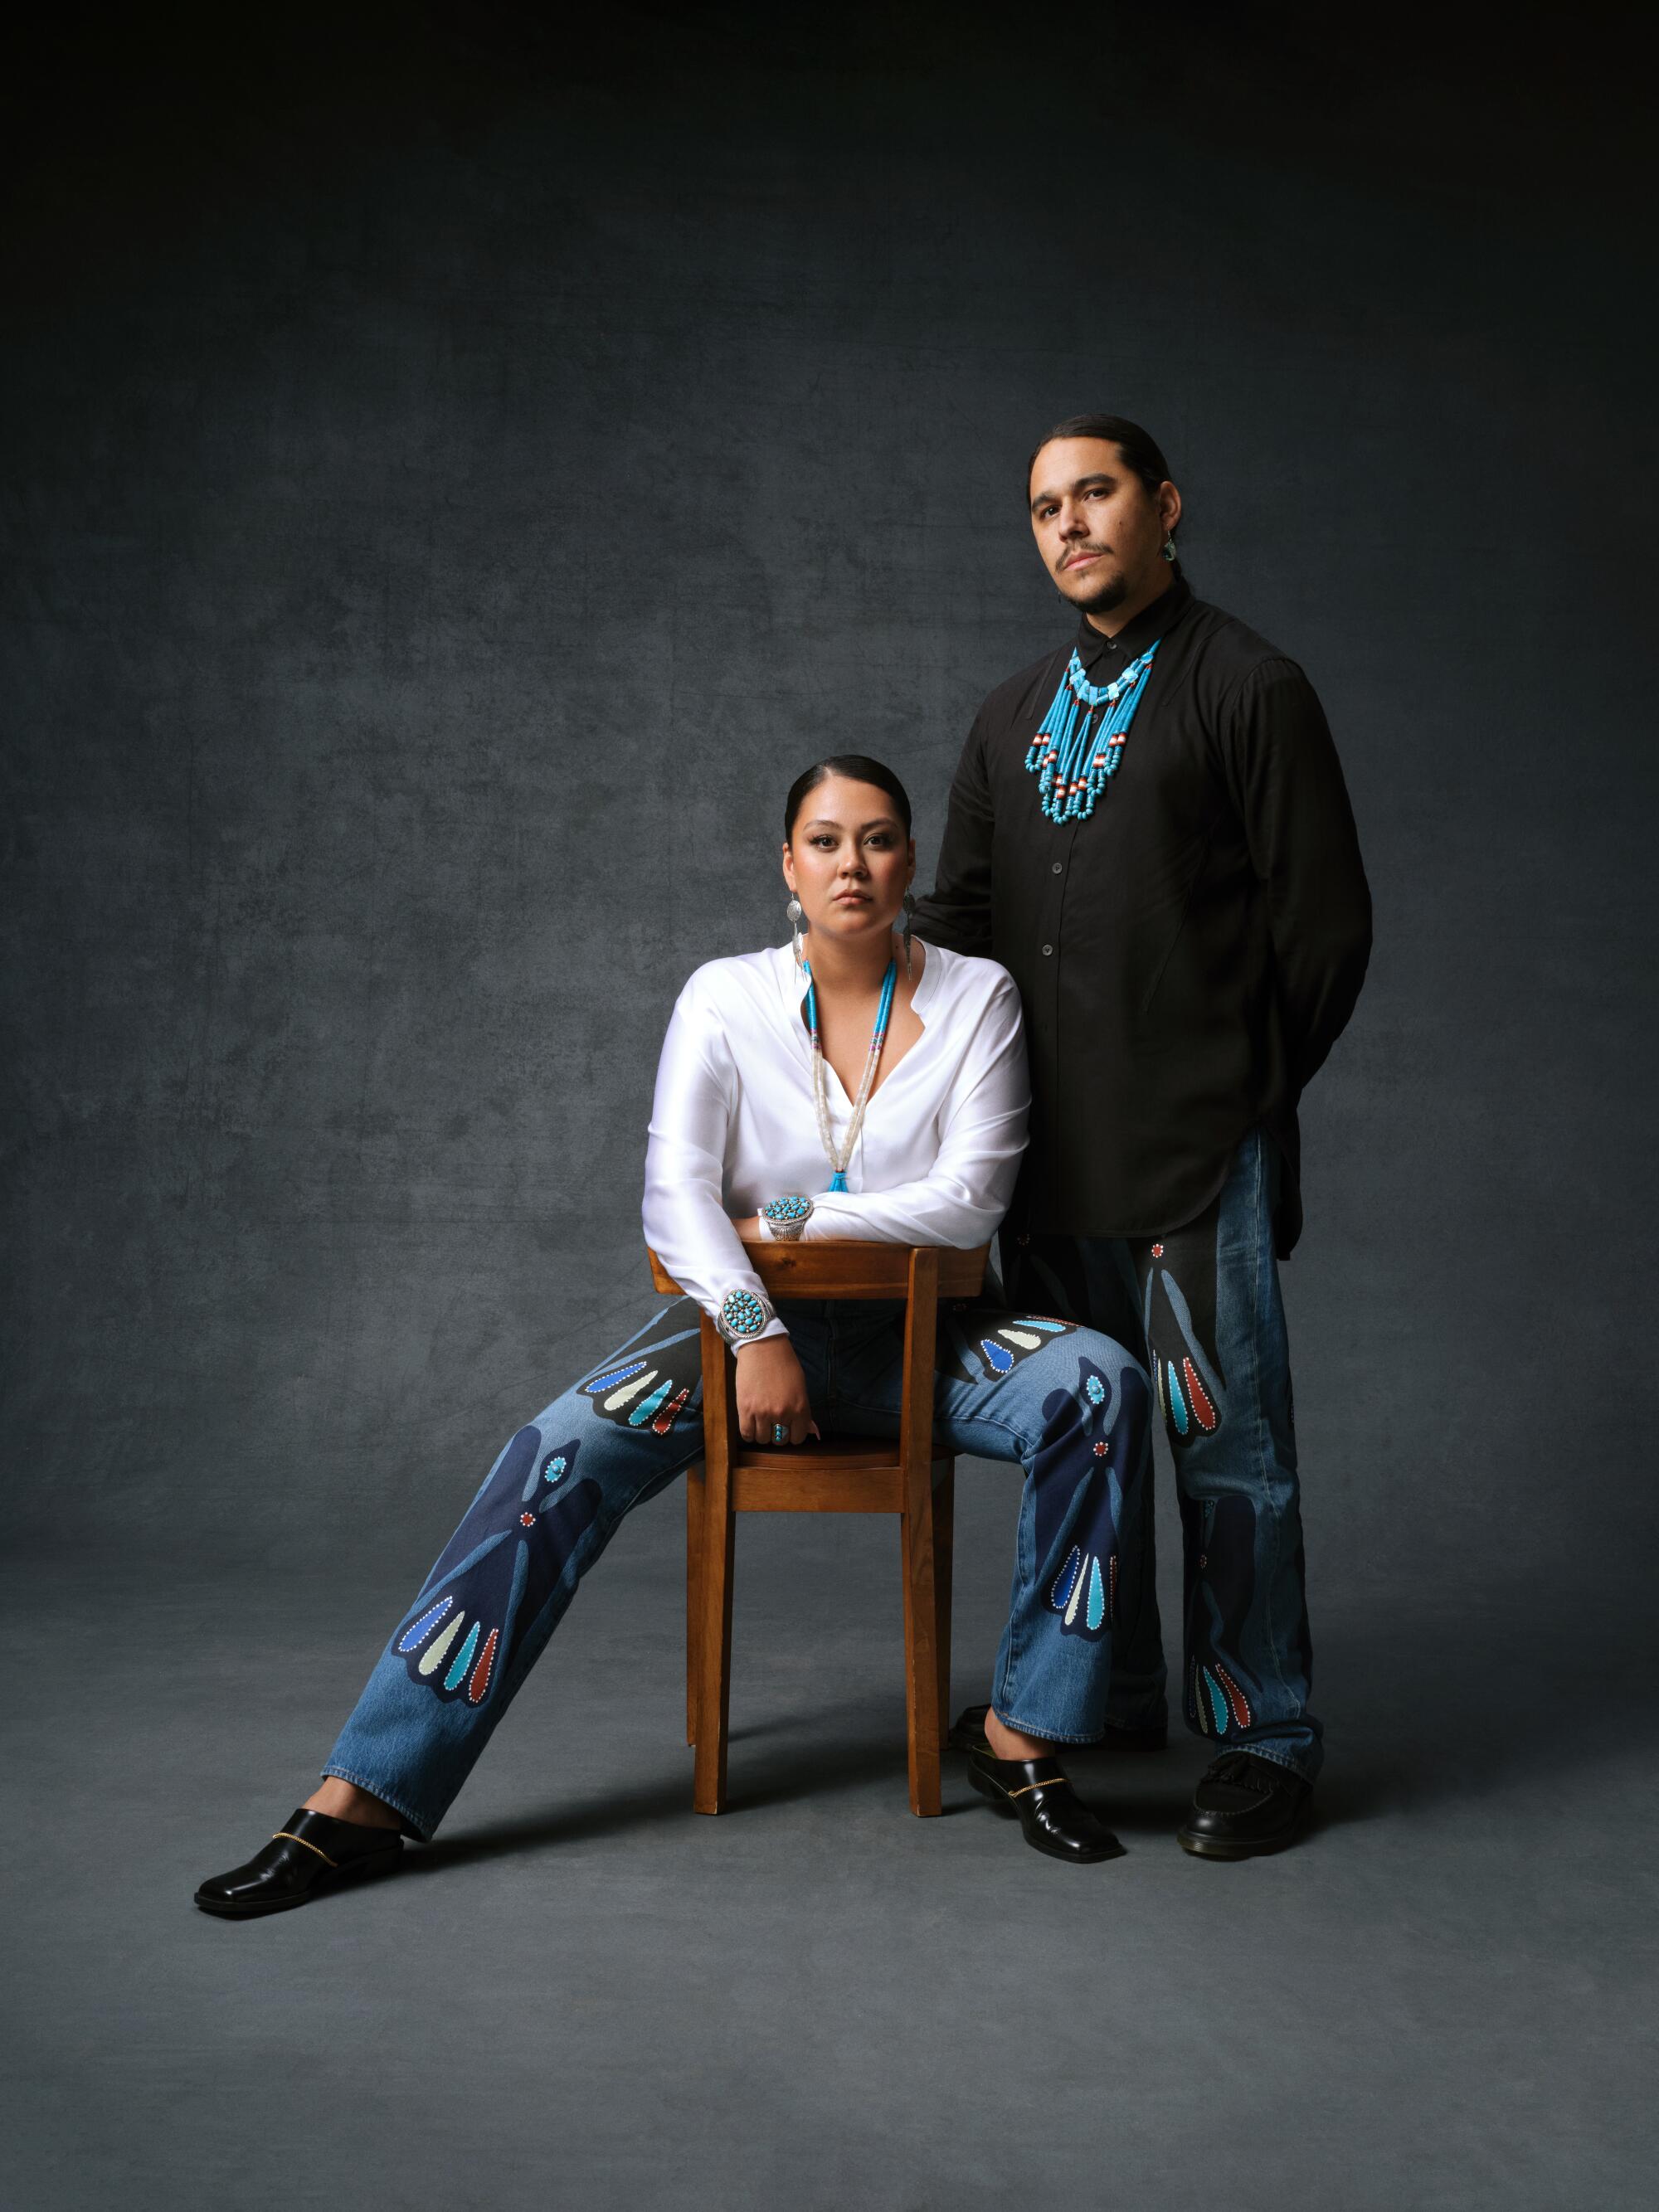 Siera Begaye Amaya and Tomás Karmelo Amaya model the new collection, which was inspired by Spanto's late father, Butch.